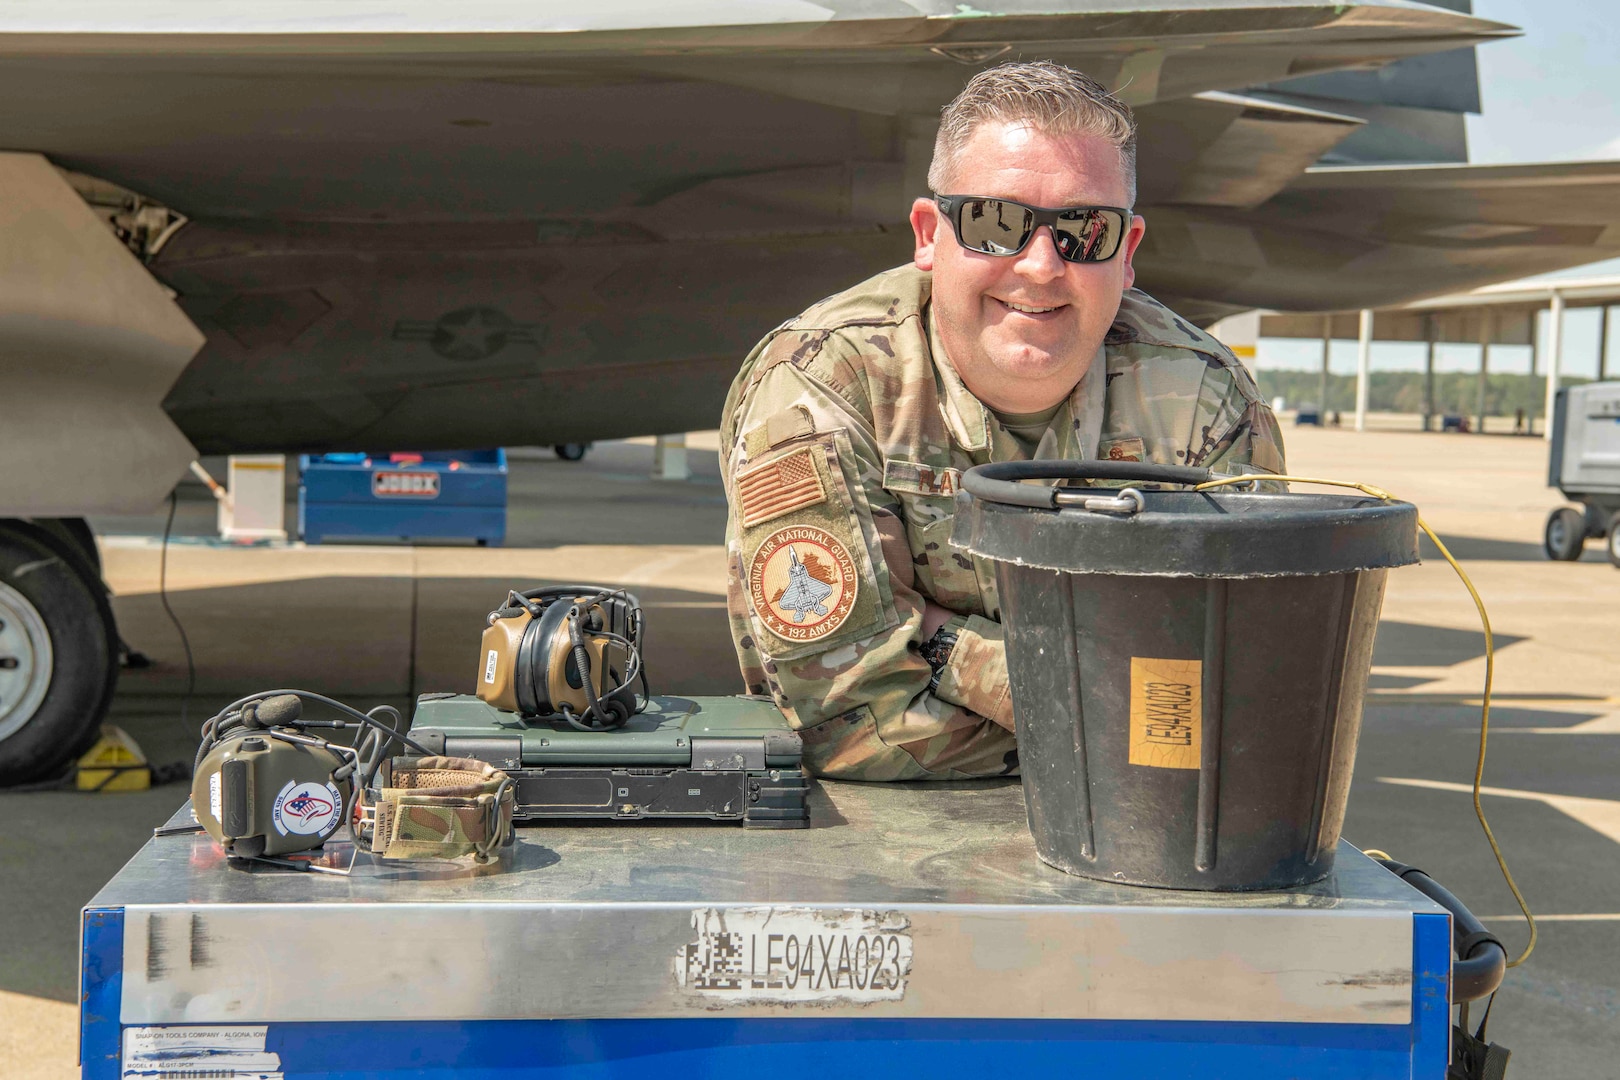 A crew chief smiles for a photo next to an F-22 Raptor